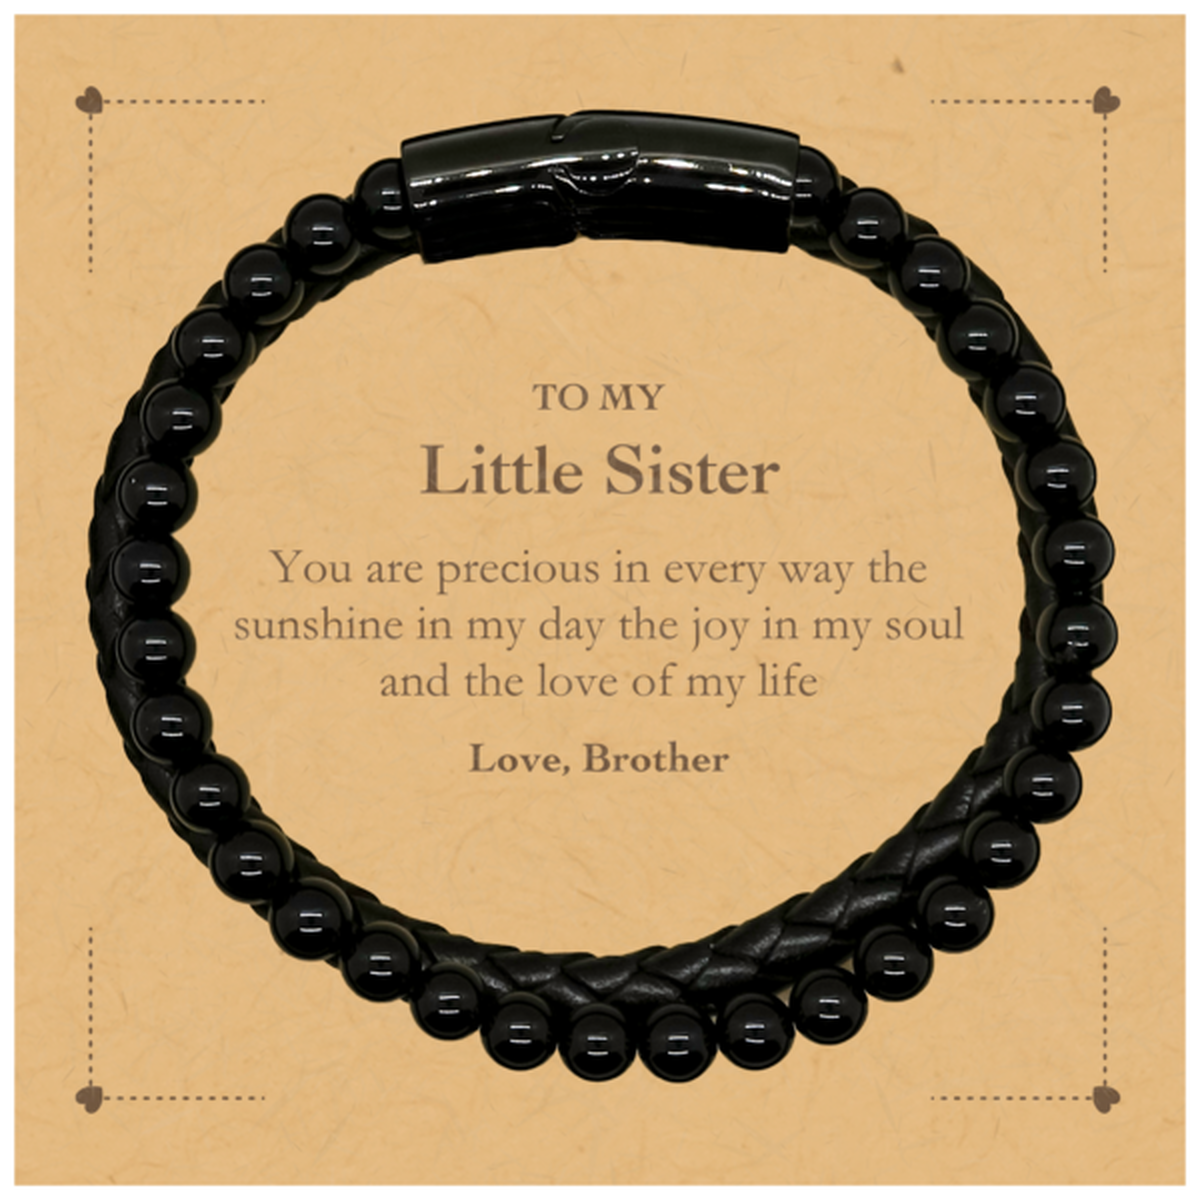 Graduation Gifts for Little Sister Stone Leather Bracelets Present from Brother, Christmas Little Sister Birthday Gifts Little Sister You are precious in every way the sunshine in my day. Love, Brother